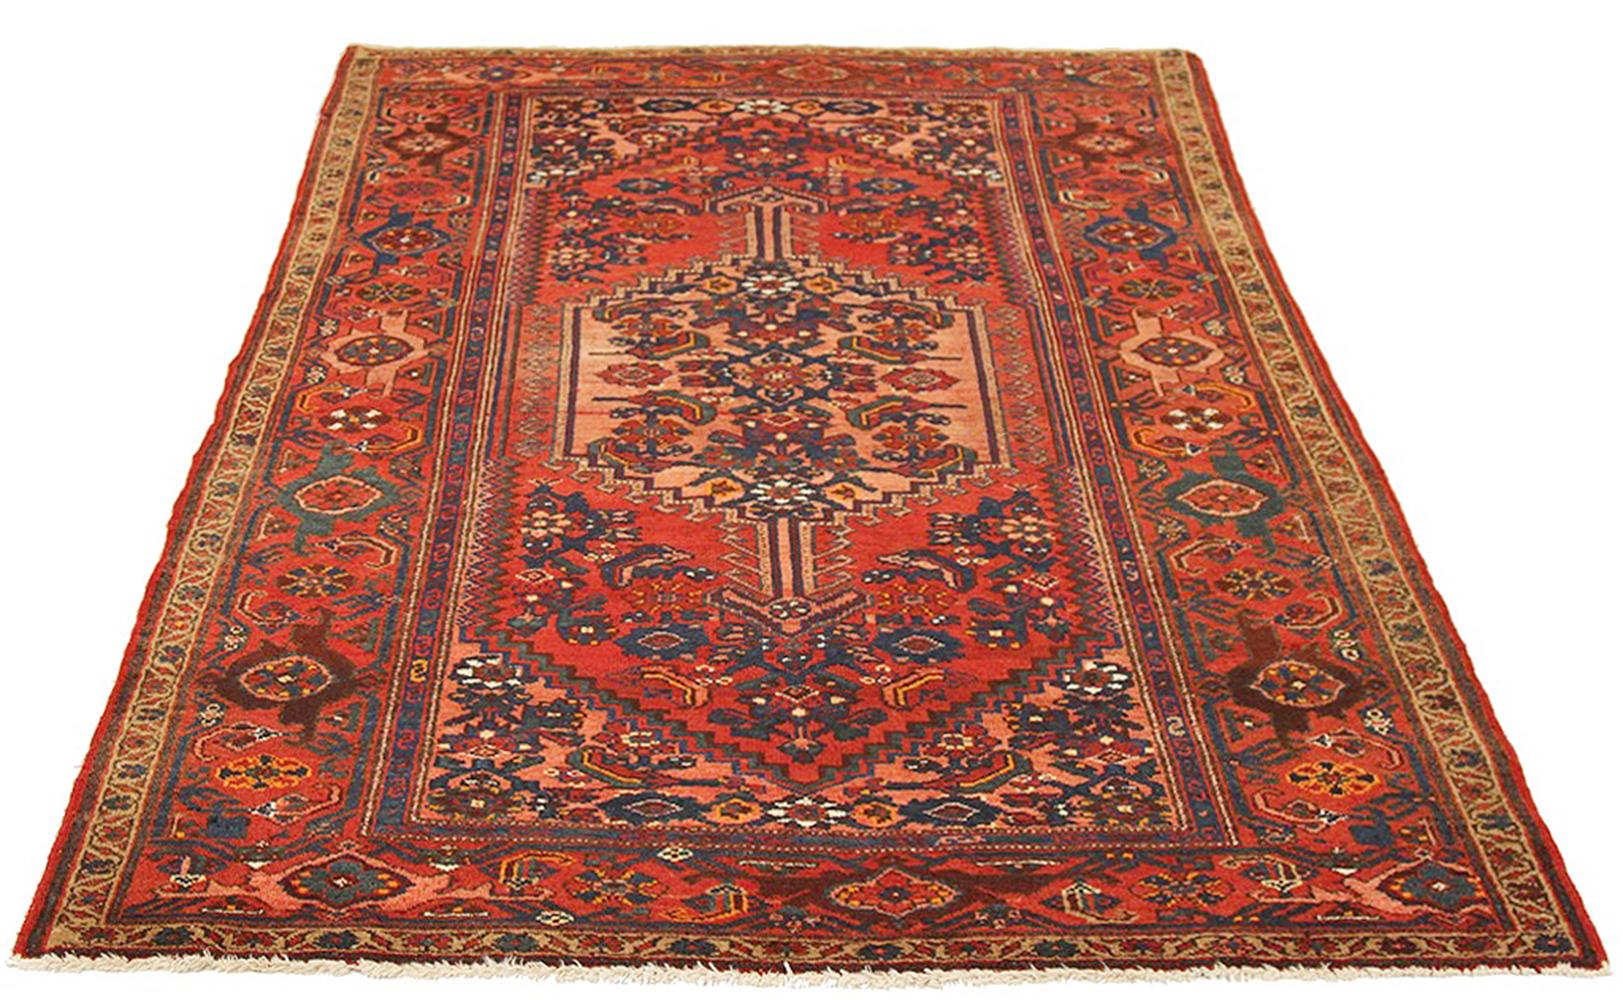 Antique Persian rug handwoven from the finest sheep’s wool and colored with all-natural vegetable dyes that are safe for humans and pets. It’s a traditional Hamedan design featuring red and navy floral details over a red and beige field. The details